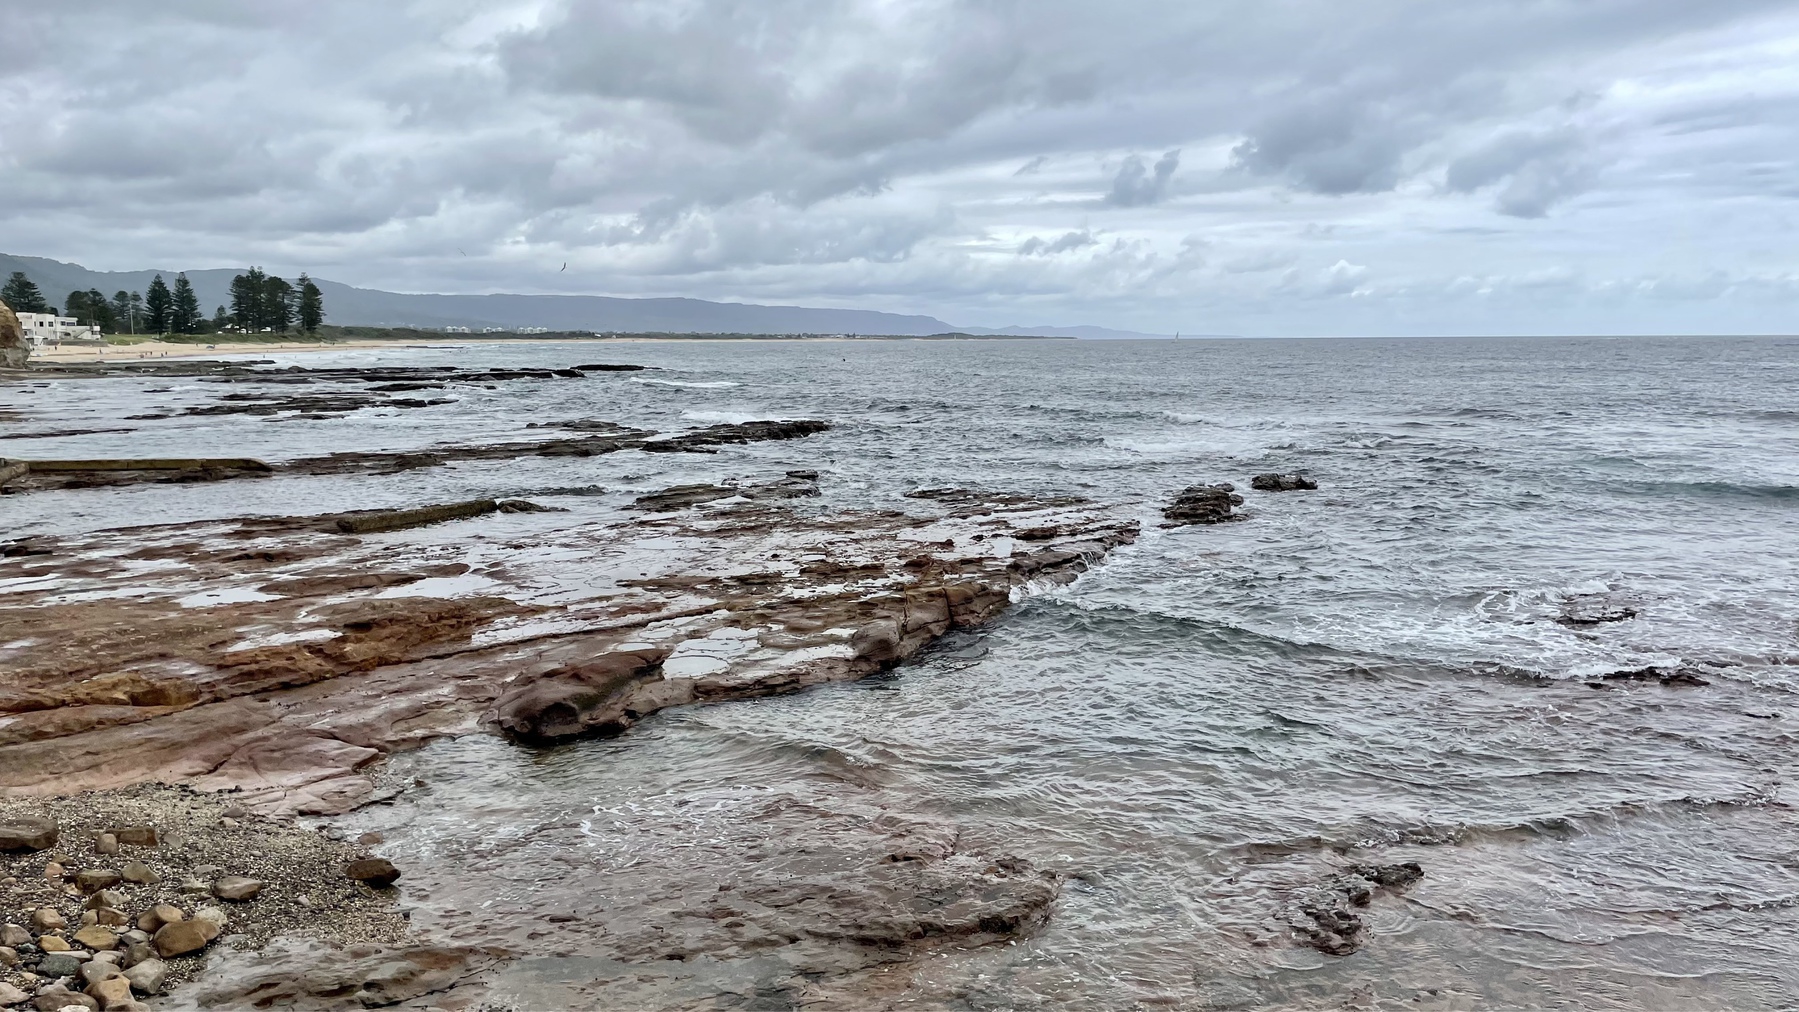 Rockpools in the foreground and beaches and the mountain escarpment stretching into the distance